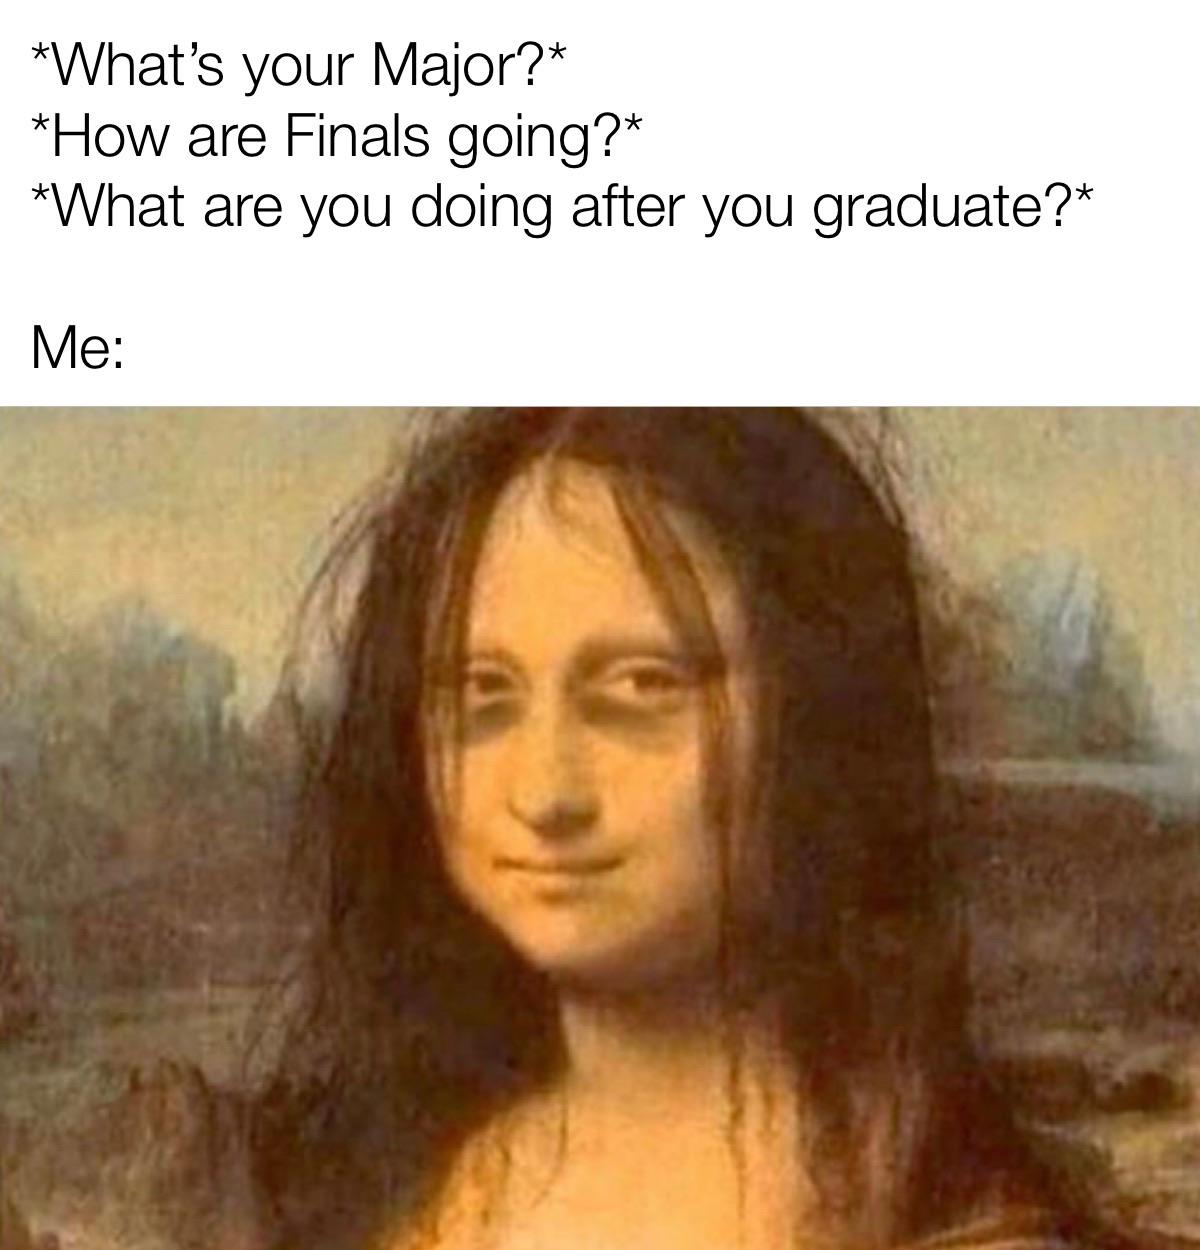 r/collegememes- college dank memes - you feeling ok mona lisa - What's your Major? How are Finals going? What are you doing after you graduate? Me